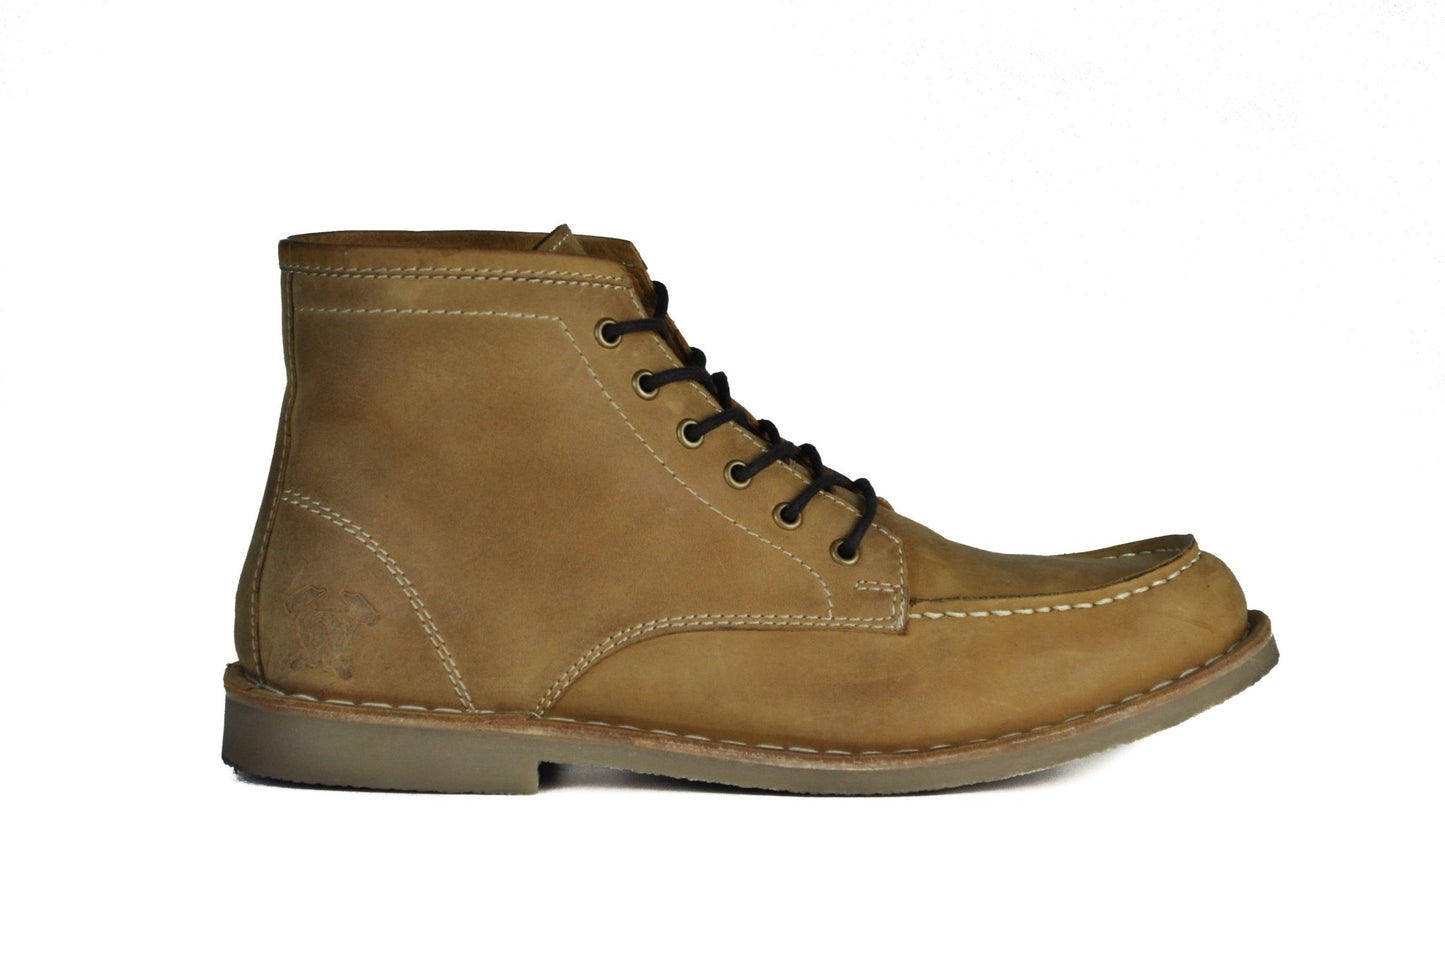 Hound & Hammer The Cooper | Men's Crazy Horse Tan Leather Boots - Men - Footwear - Boots - Ankle Boots - Benn~Burry